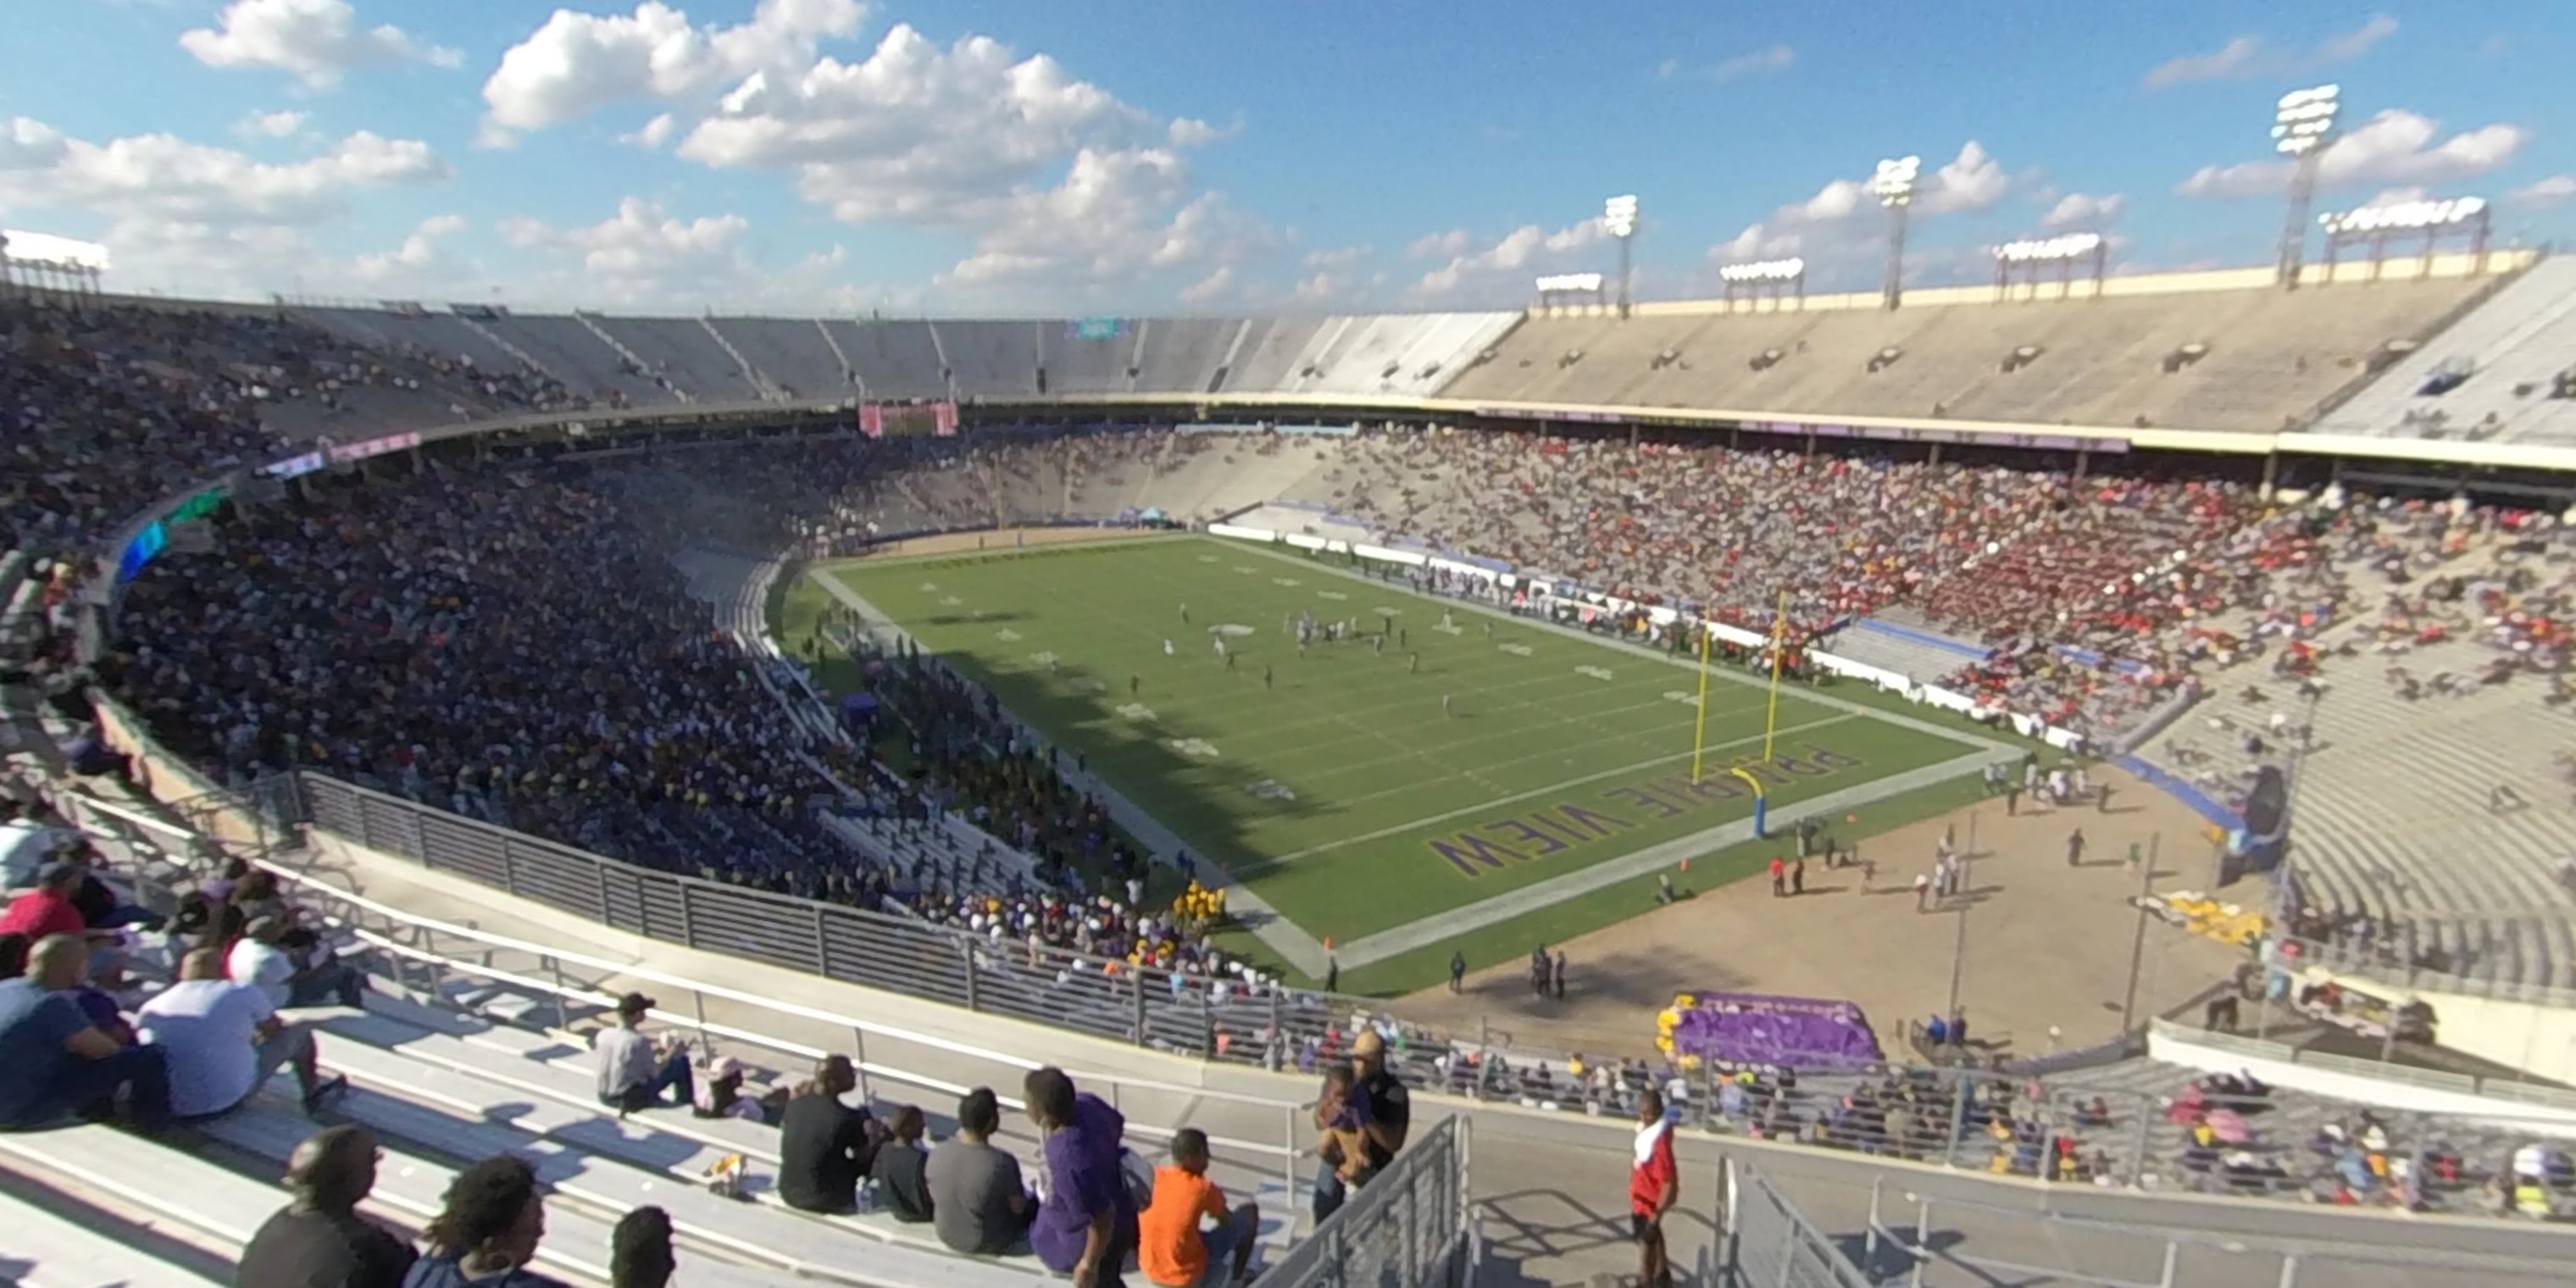 section 142 panoramic seat view  - cotton bowl